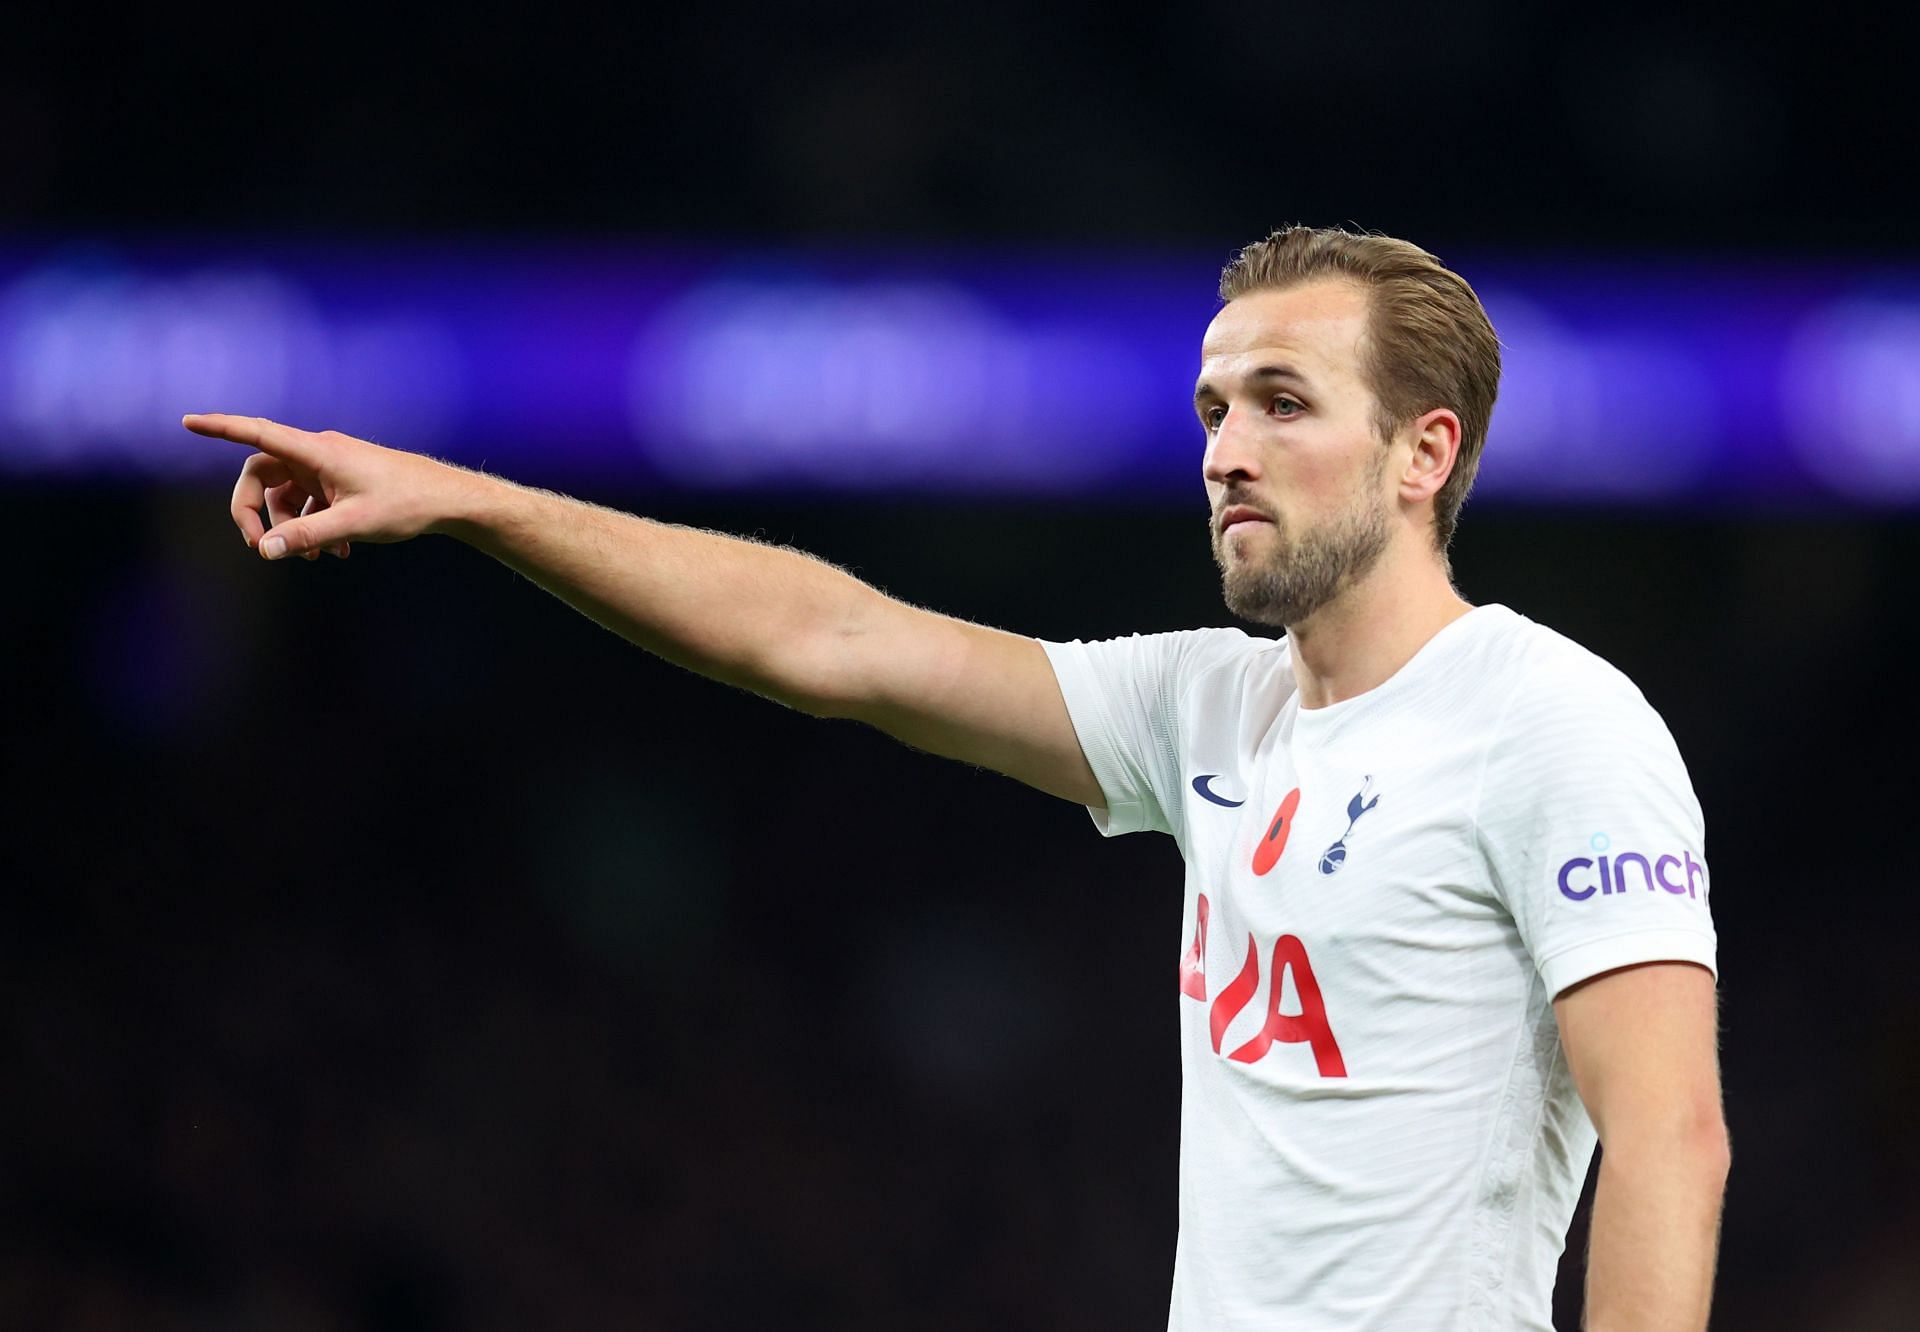 Harry Kane has had a slow start in Tottenham for the current season (Images via Getty)